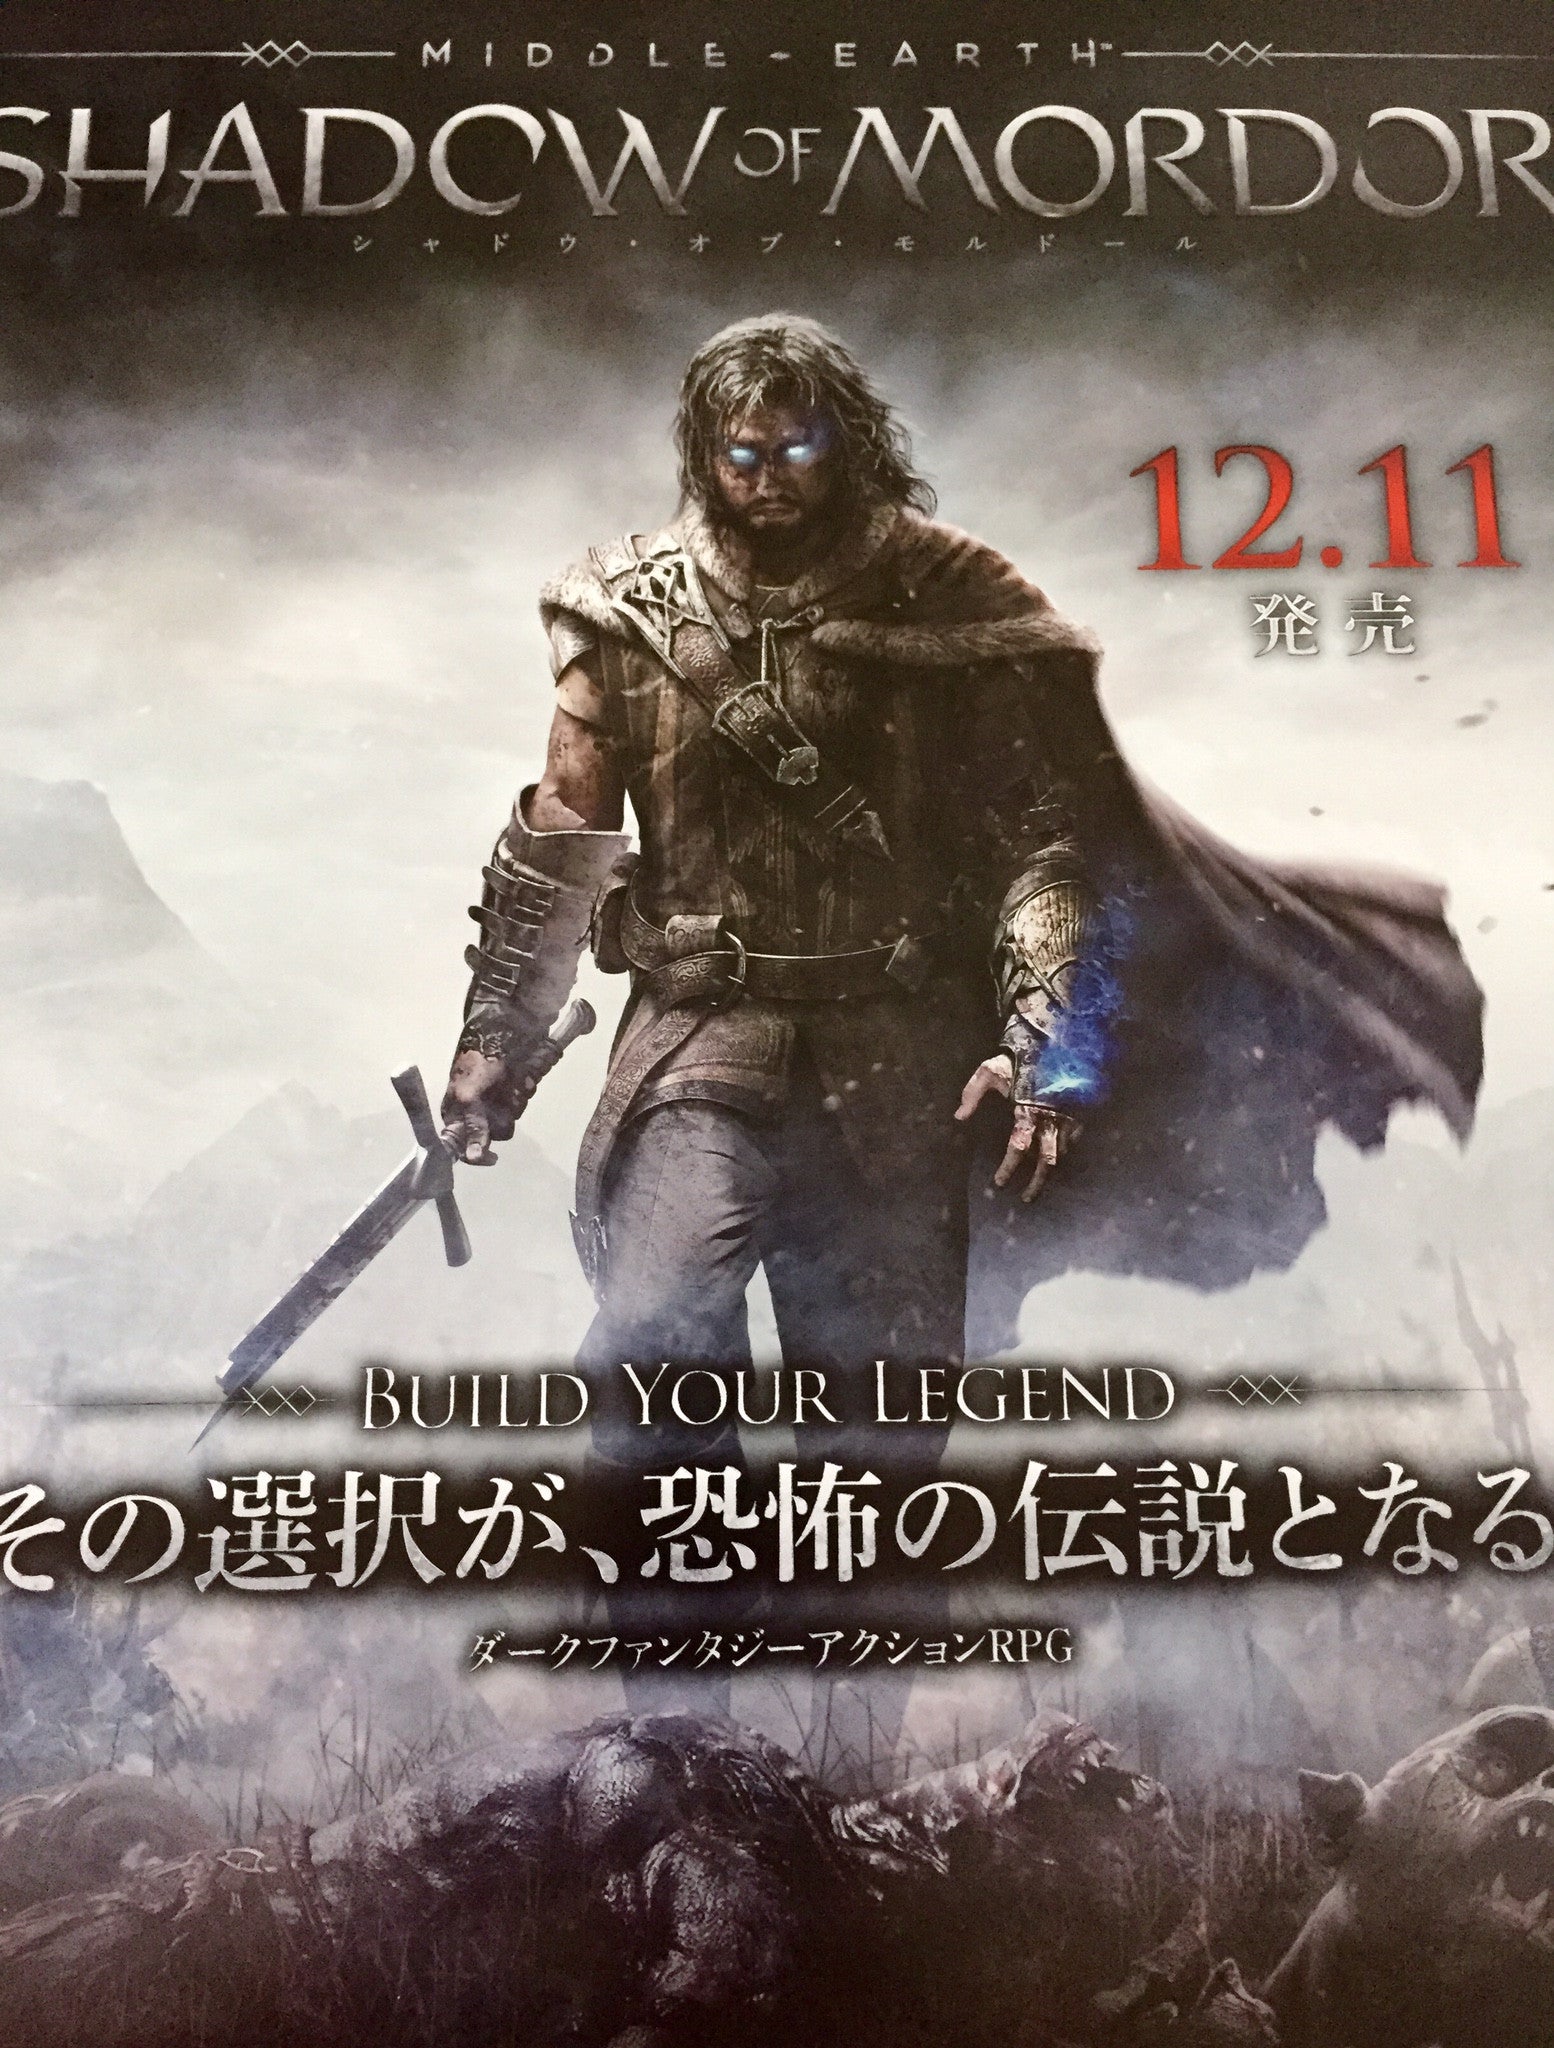 Shadow of Mordor (B2) Japanese Promotional Poster